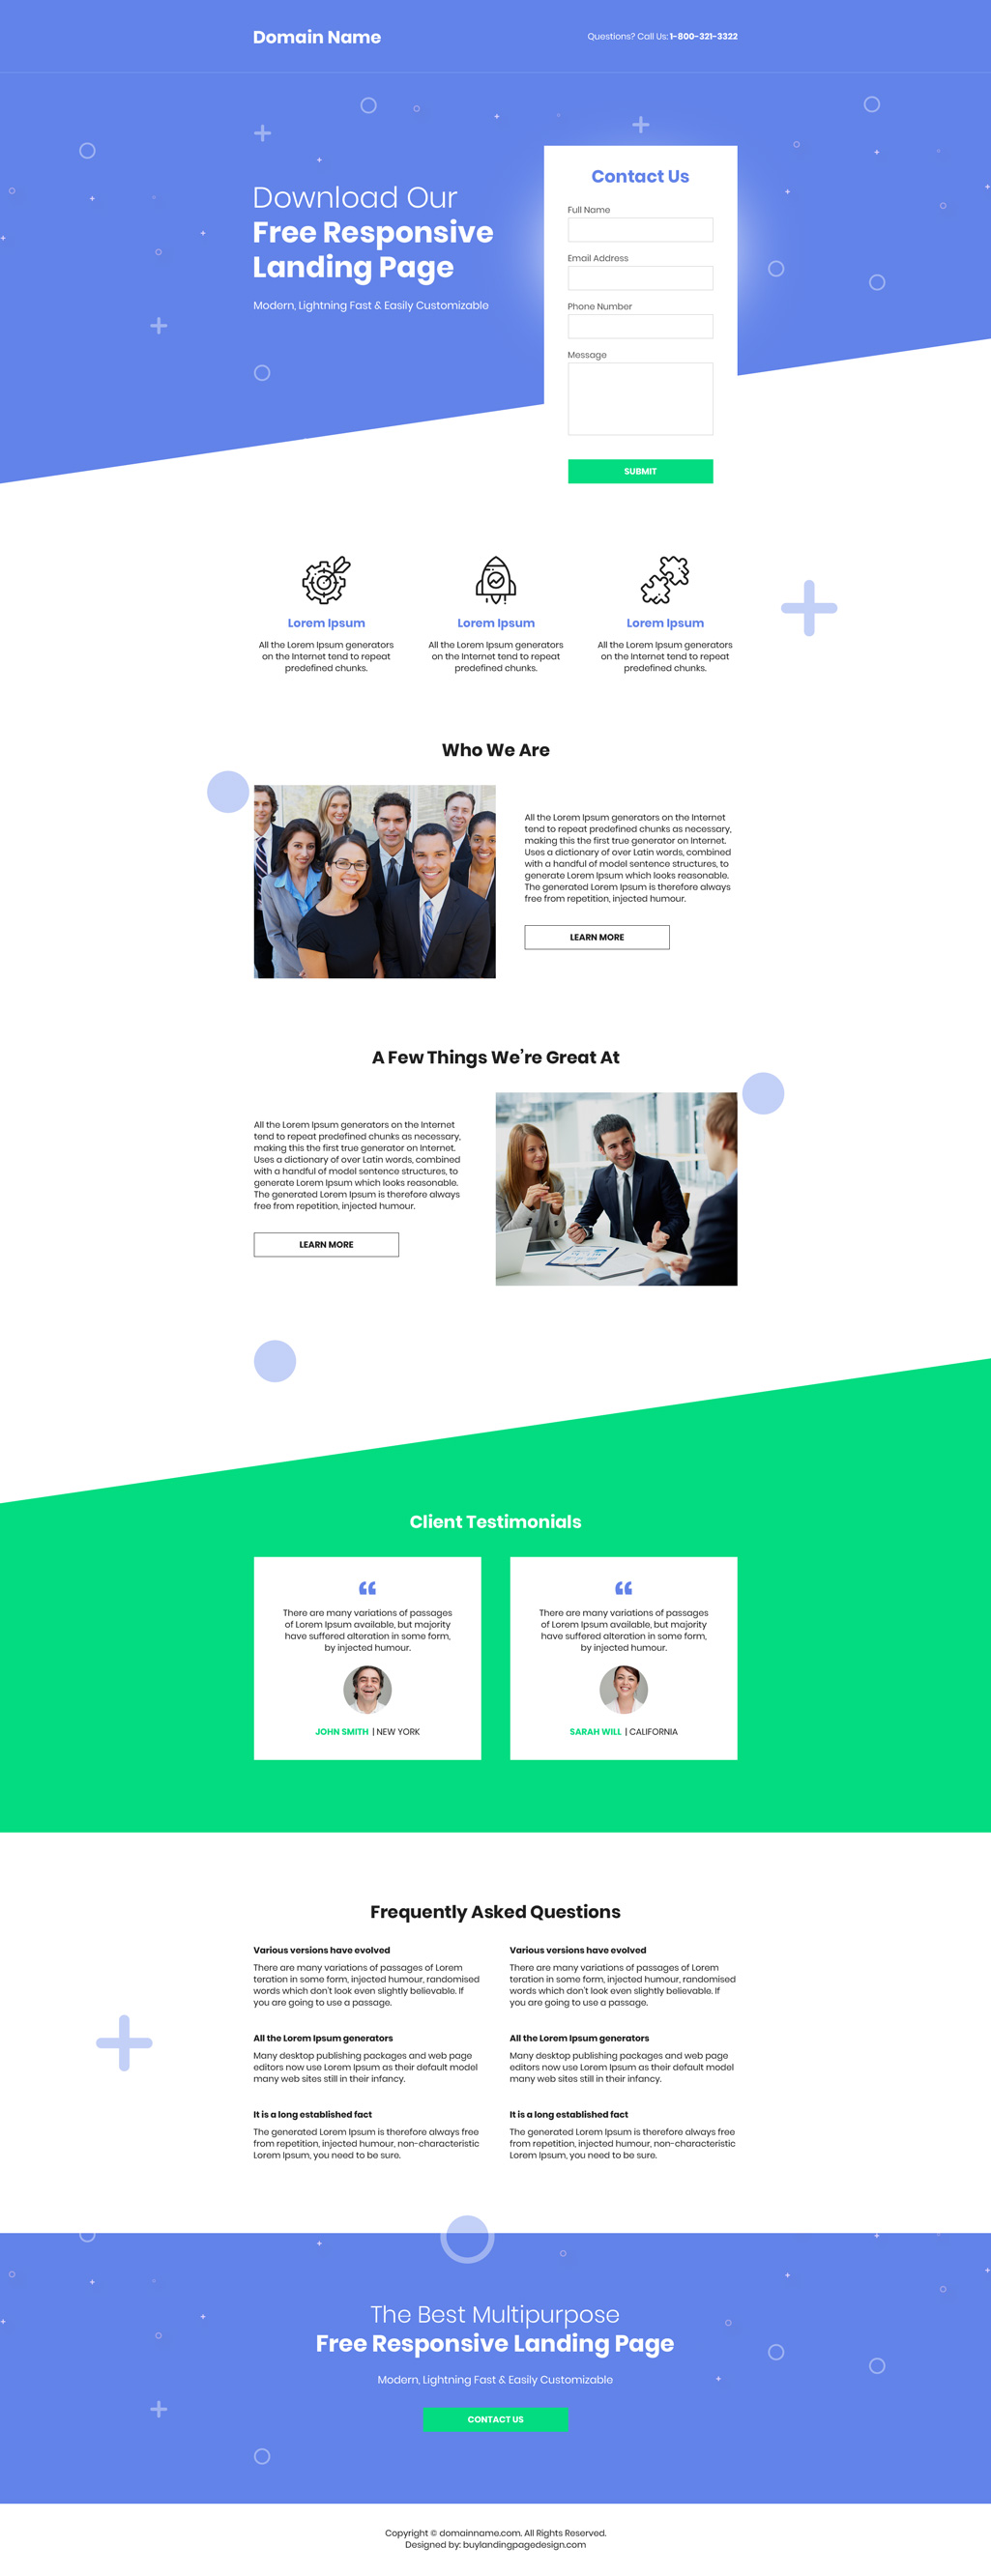 Download free landing page design to capture quality leads